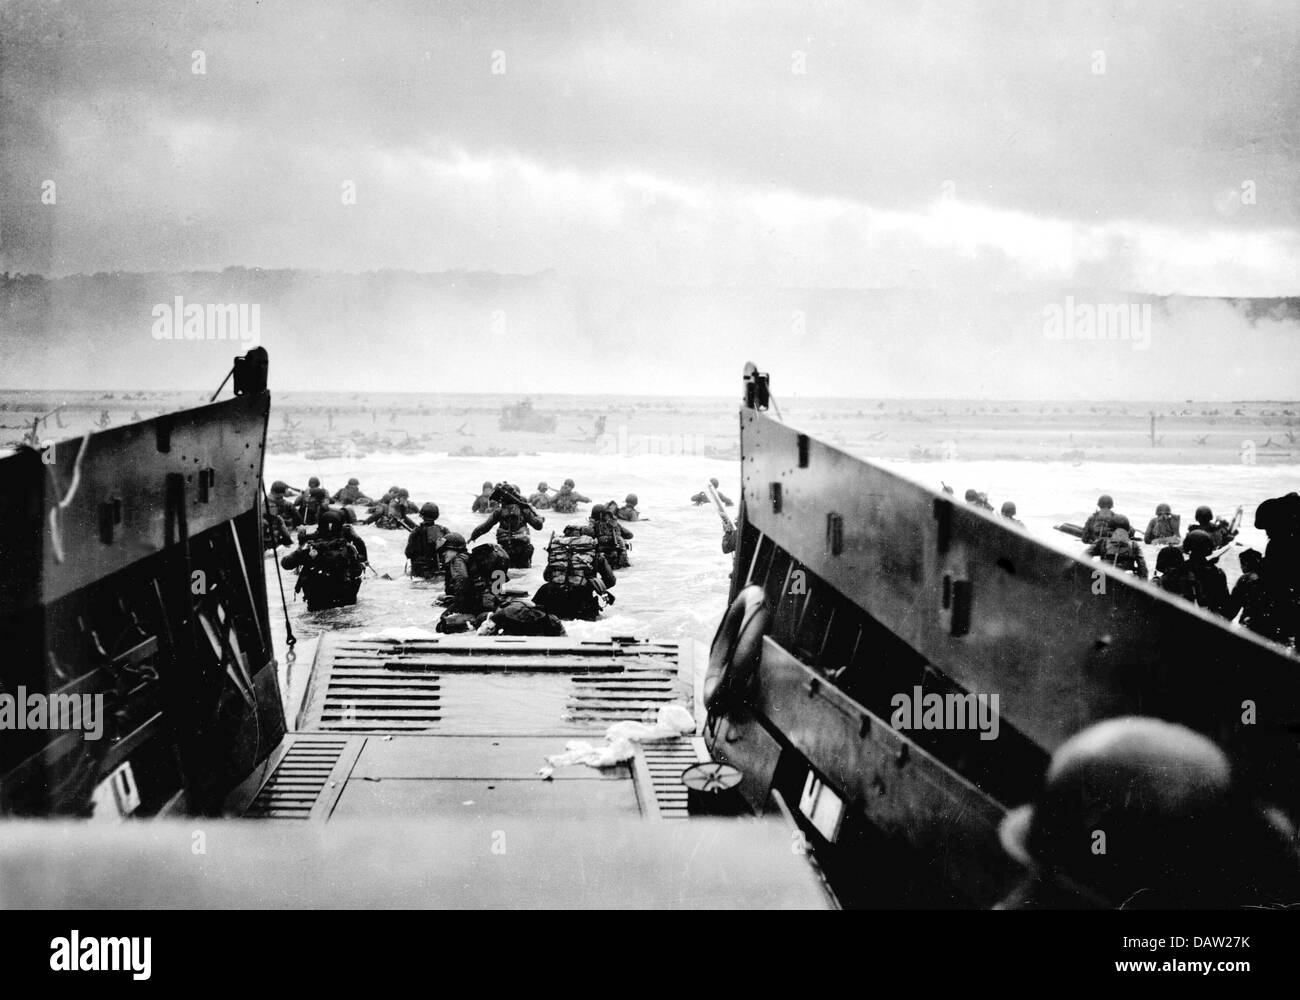 NORMANDY LANDINGS US troops wade ashore on Omaha Beach early on 6 June 1944 - see Description for details. Photo Robert Sargent Stock Photo